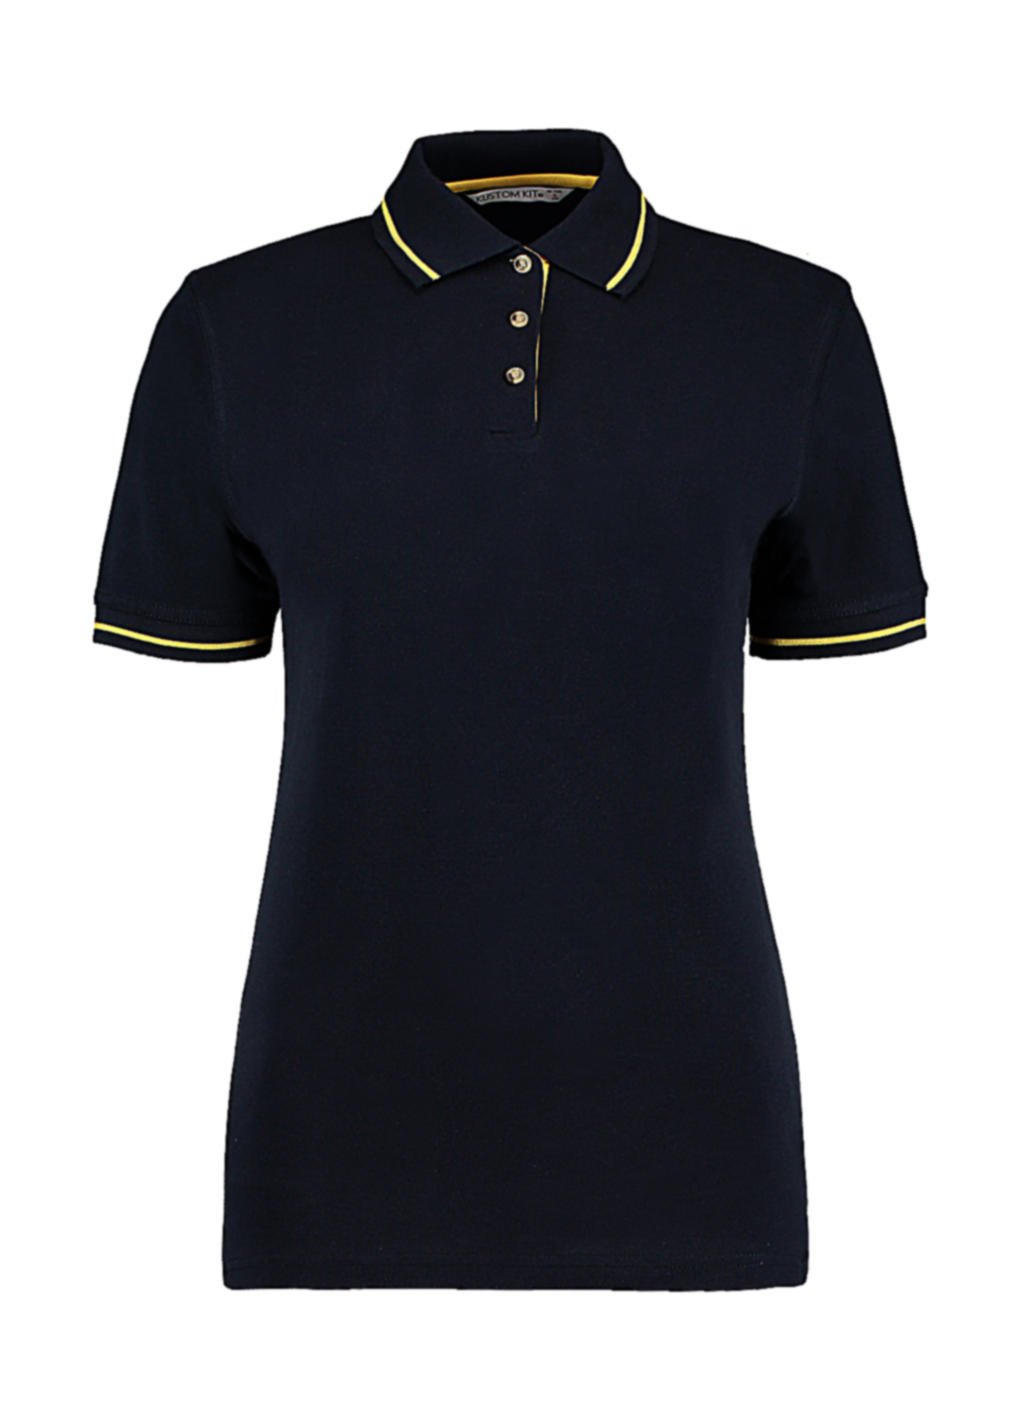  Womens St. Mellion Polo in Farbe Navy/Sun Yellow